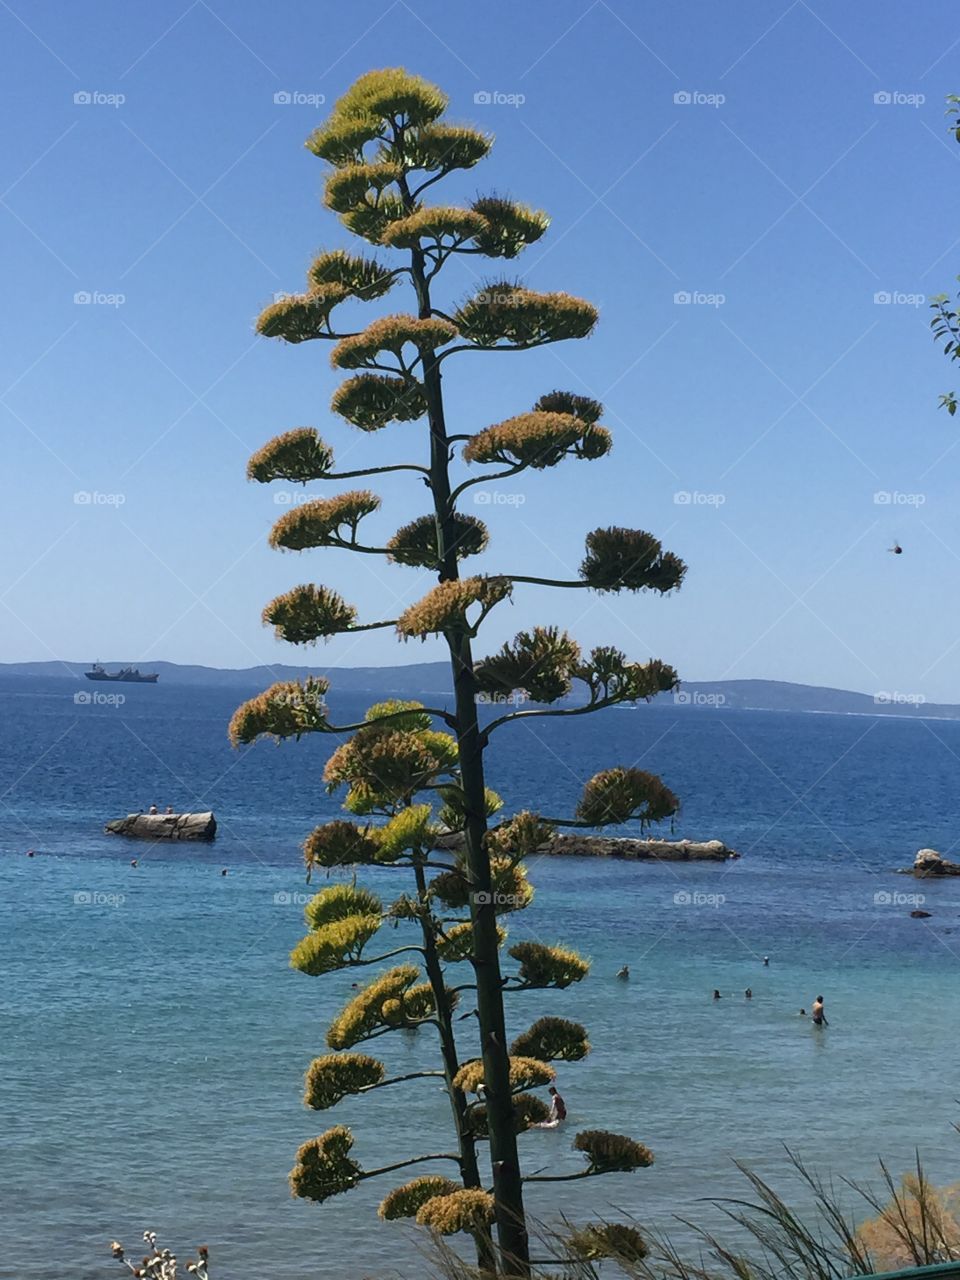 Agave in Croatia. The flower of an agave in Split, Croatia. An agave has a flower only once in its life